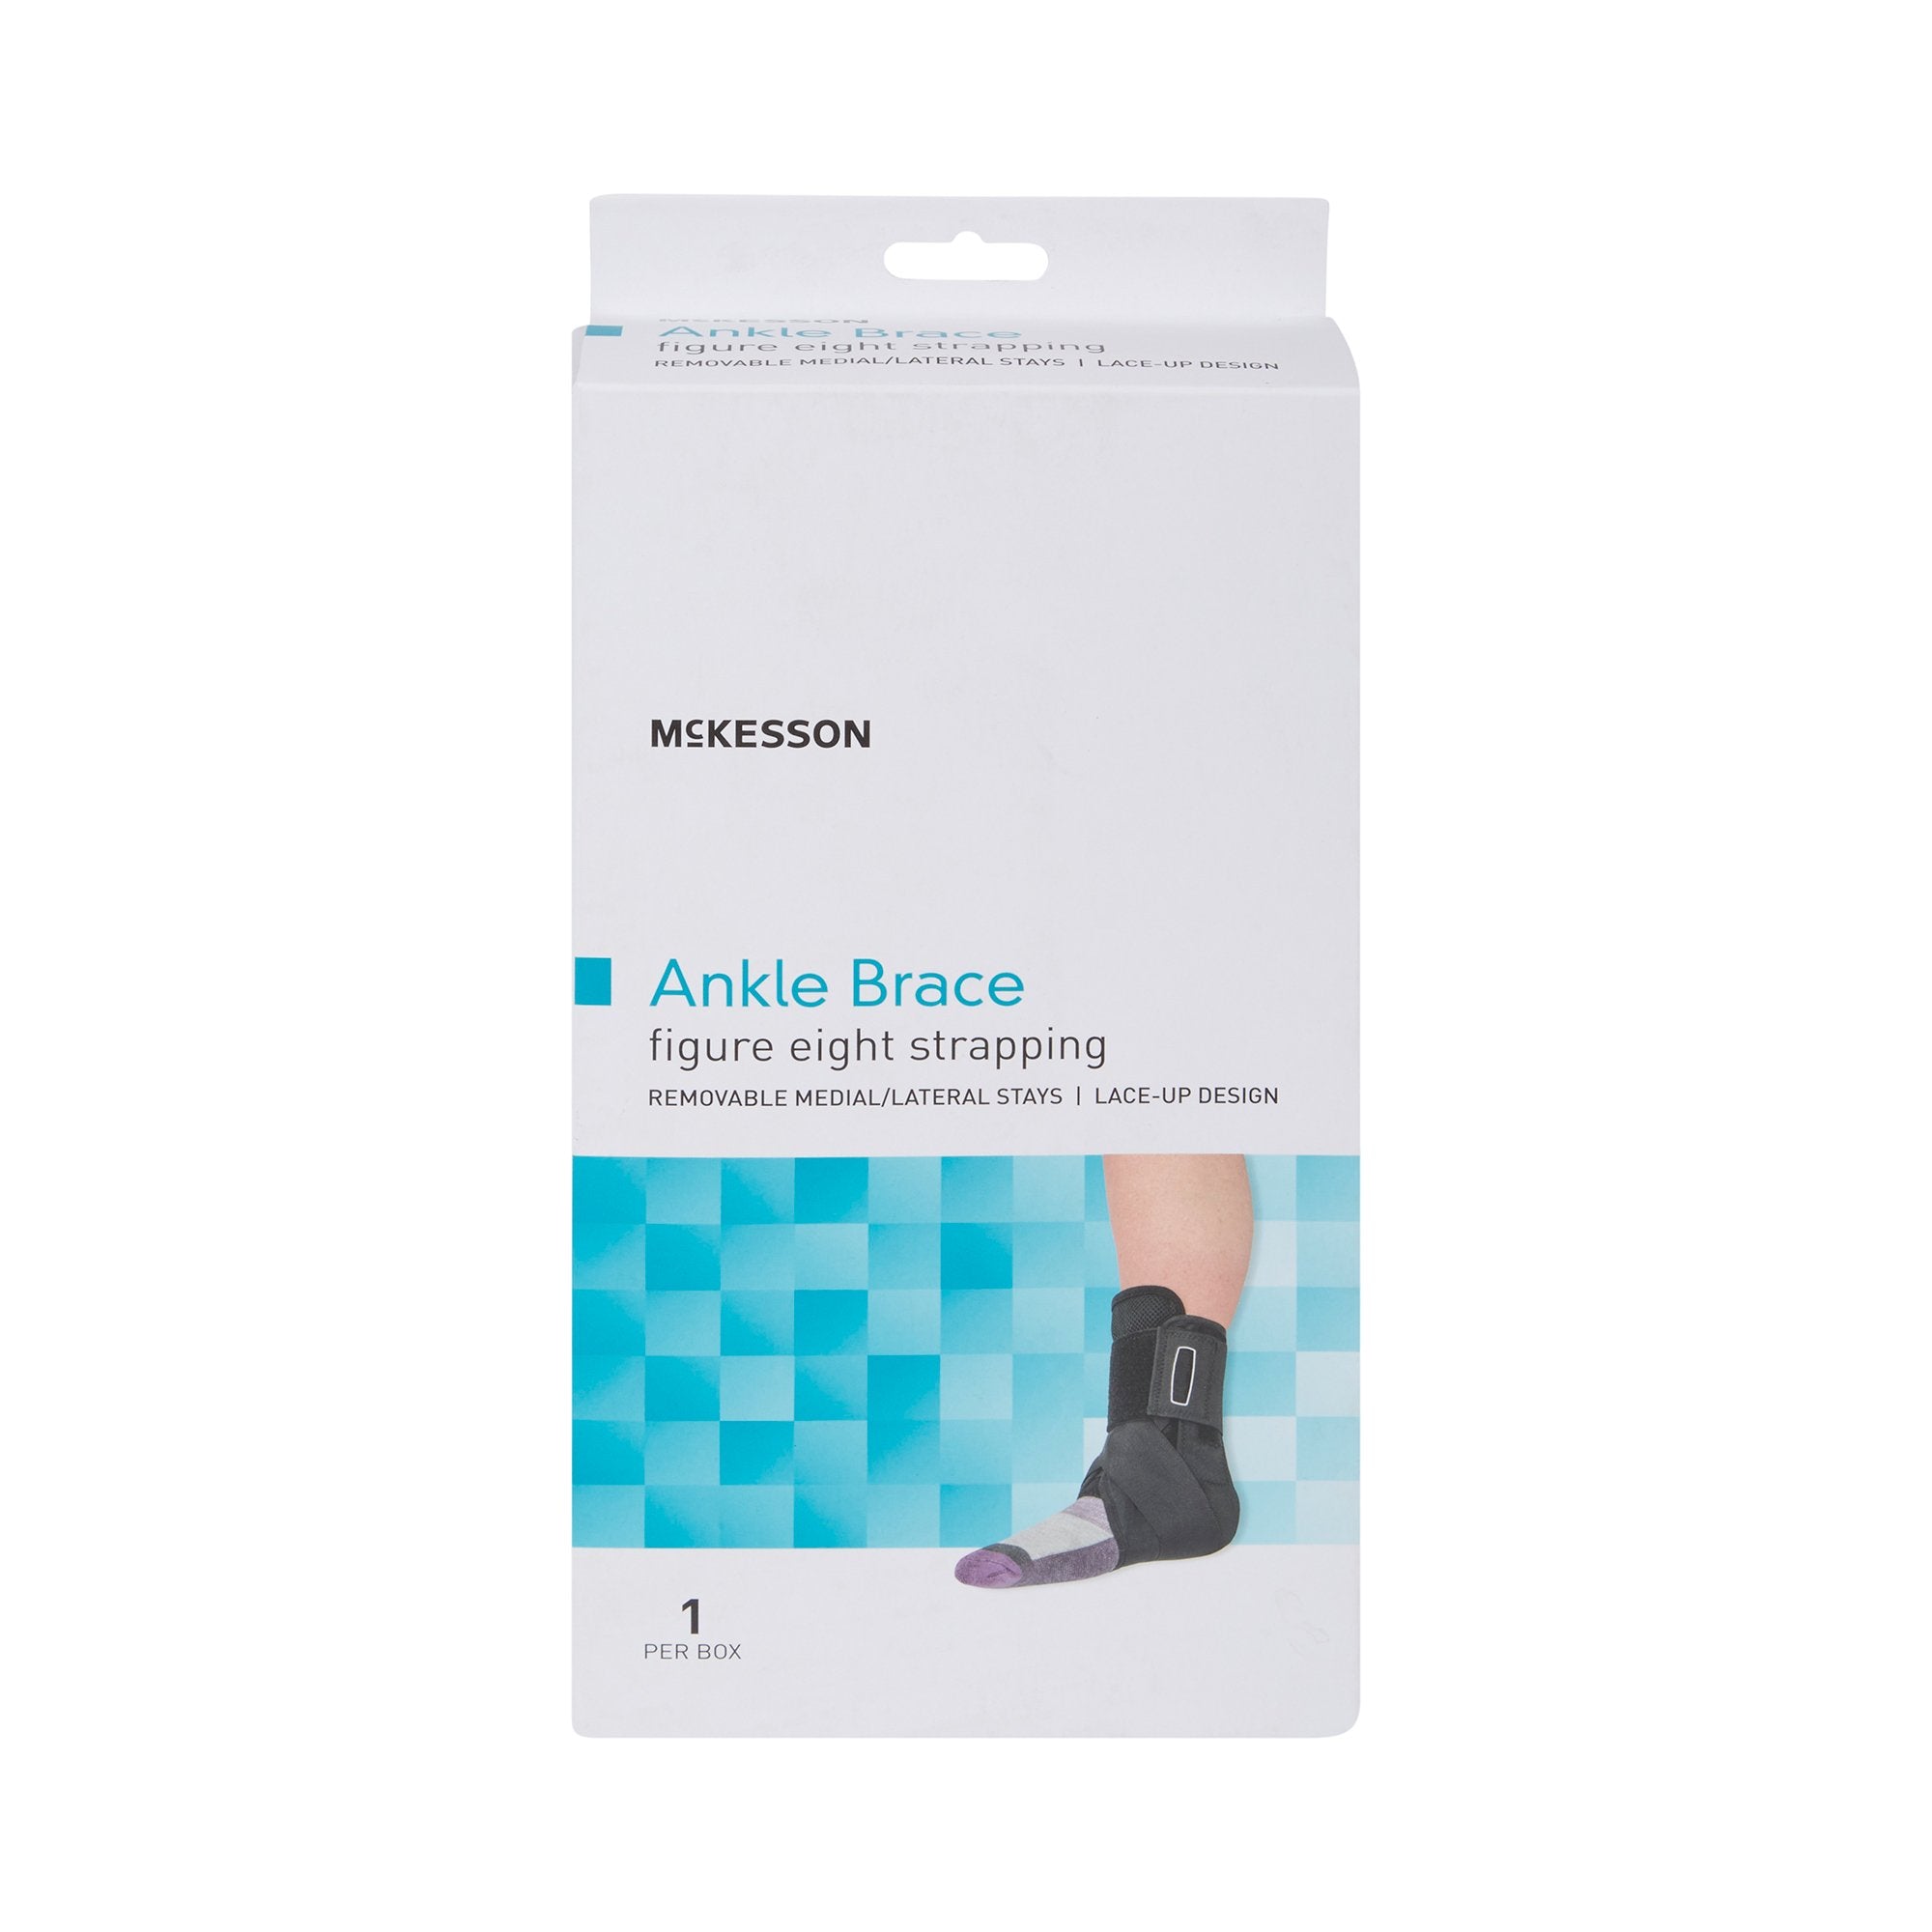 McKesson Unisex X-Small Lace-Up for Custom Fit & Figure-8 Strapping to Lock the Calcaneus in Place.